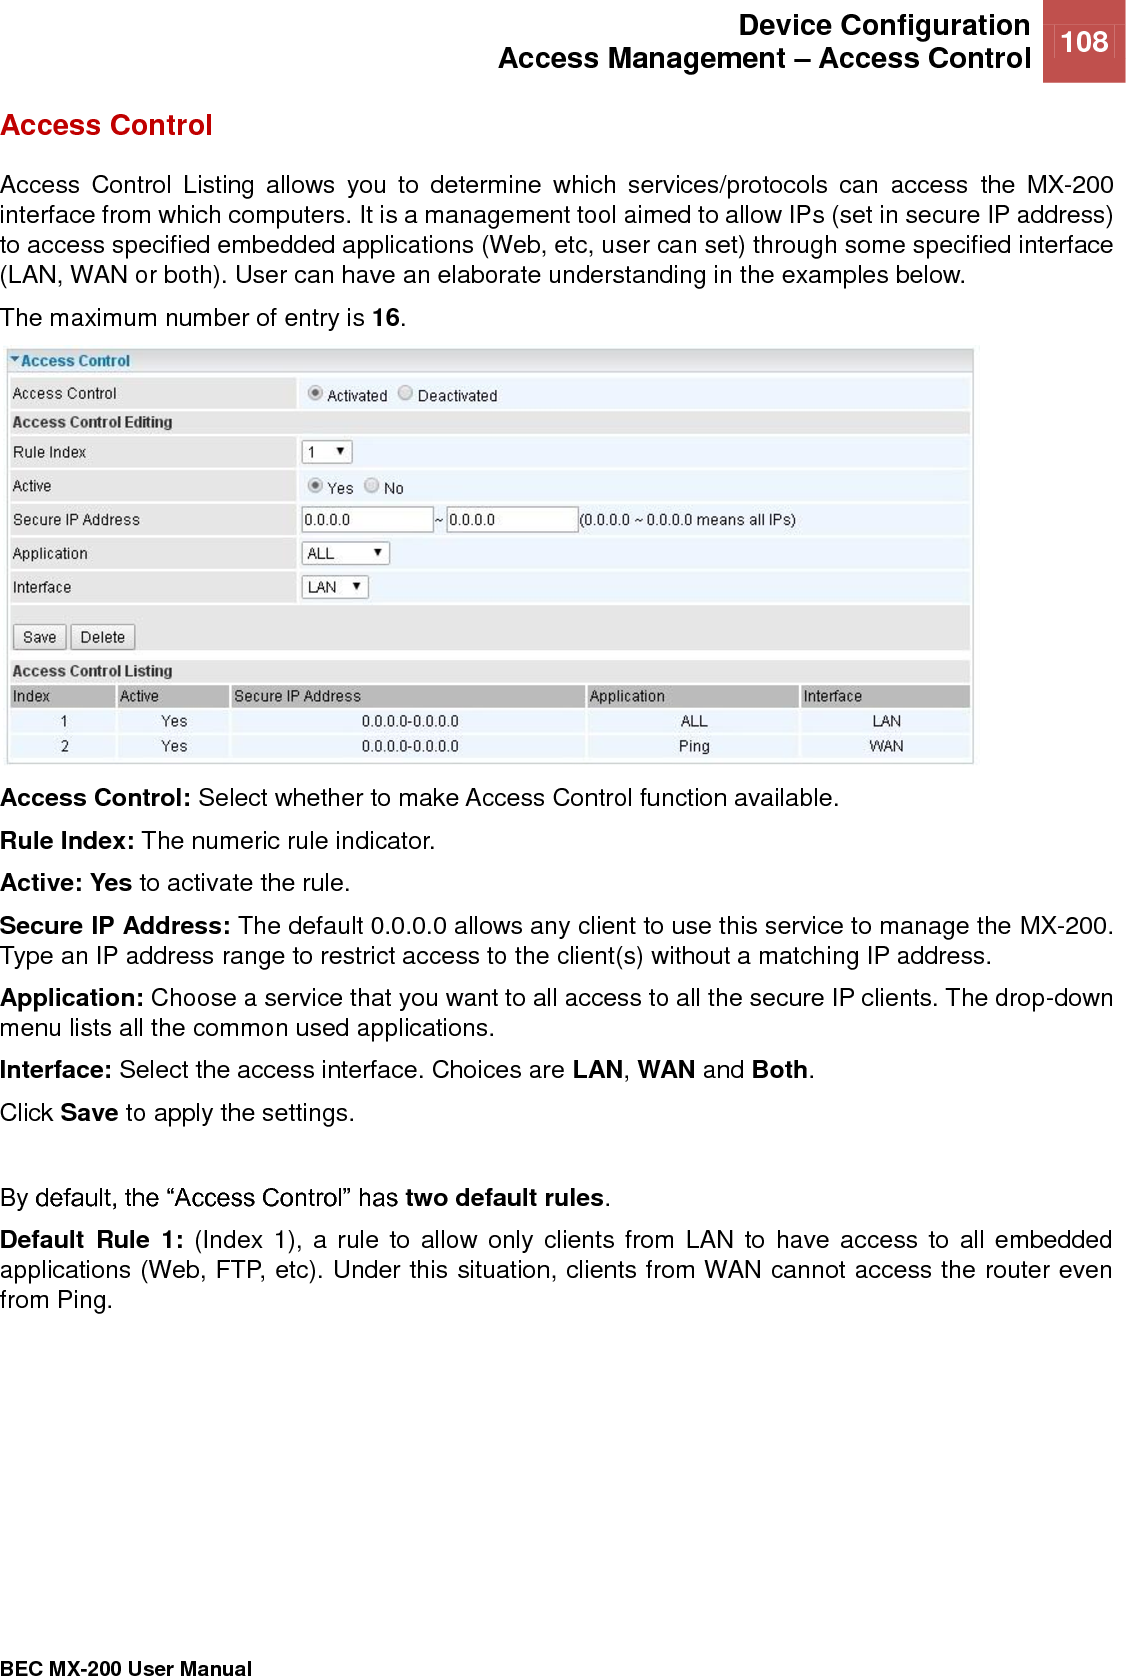  Device Configuration Access Management – Access Control 108   BEC MX-200 User Manual  Access Control Access  Control  Listing  allows  you  to  determine  which  services/protocols  can  access  the  MX-200 interface from which computers. It is a management tool aimed to allow IPs (set in secure IP address) to access specified embedded applications (Web, etc, user can set) through some specified interface (LAN, WAN or both). User can have an elaborate understanding in the examples below. The maximum number of entry is 16.  Access Control: Select whether to make Access Control function available. Rule Index: The numeric rule indicator. Active: Yes to activate the rule. Secure IP Address: The default 0.0.0.0 allows any client to use this service to manage the MX-200. Type an IP address range to restrict access to the client(s) without a matching IP address. Application: Choose a service that you want to all access to all the secure IP clients. The drop-down menu lists all the common used applications. Interface: Select the access interface. Choices are LAN, WAN and Both. Click Save to apply the settings.   By default, the “Access Control” has two default rules.  Default  Rule  1:  (Index 1), a rule to allow only clients from LAN to have access to all embedded applications (Web, FTP, etc). Under this situation, clients from WAN cannot access the router even from Ping. 